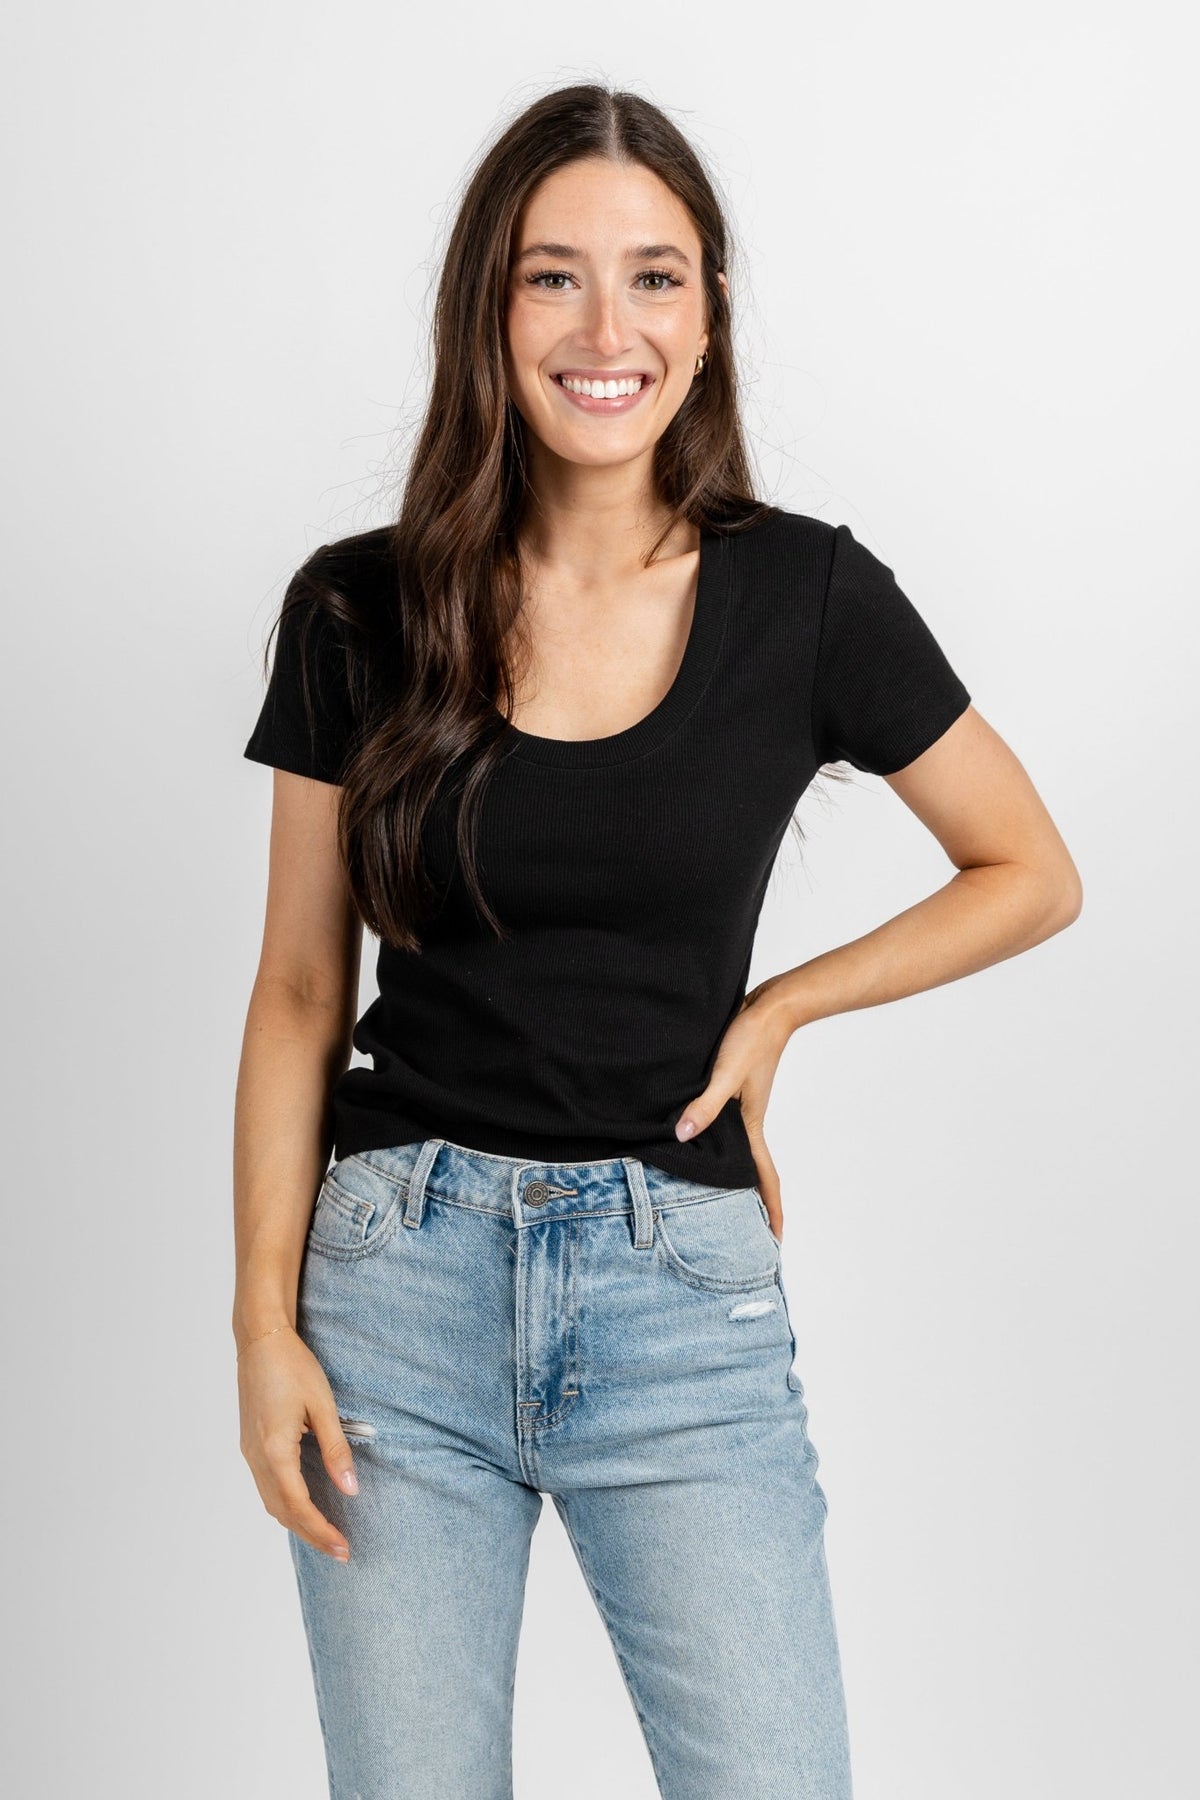 Z Supply Sirena short sleeve tee black - Z Supply Top - Z Supply Tops, Dresses, Tanks, Tees, Cardigans, Joggers and Loungewear at Lush Fashion Lounge